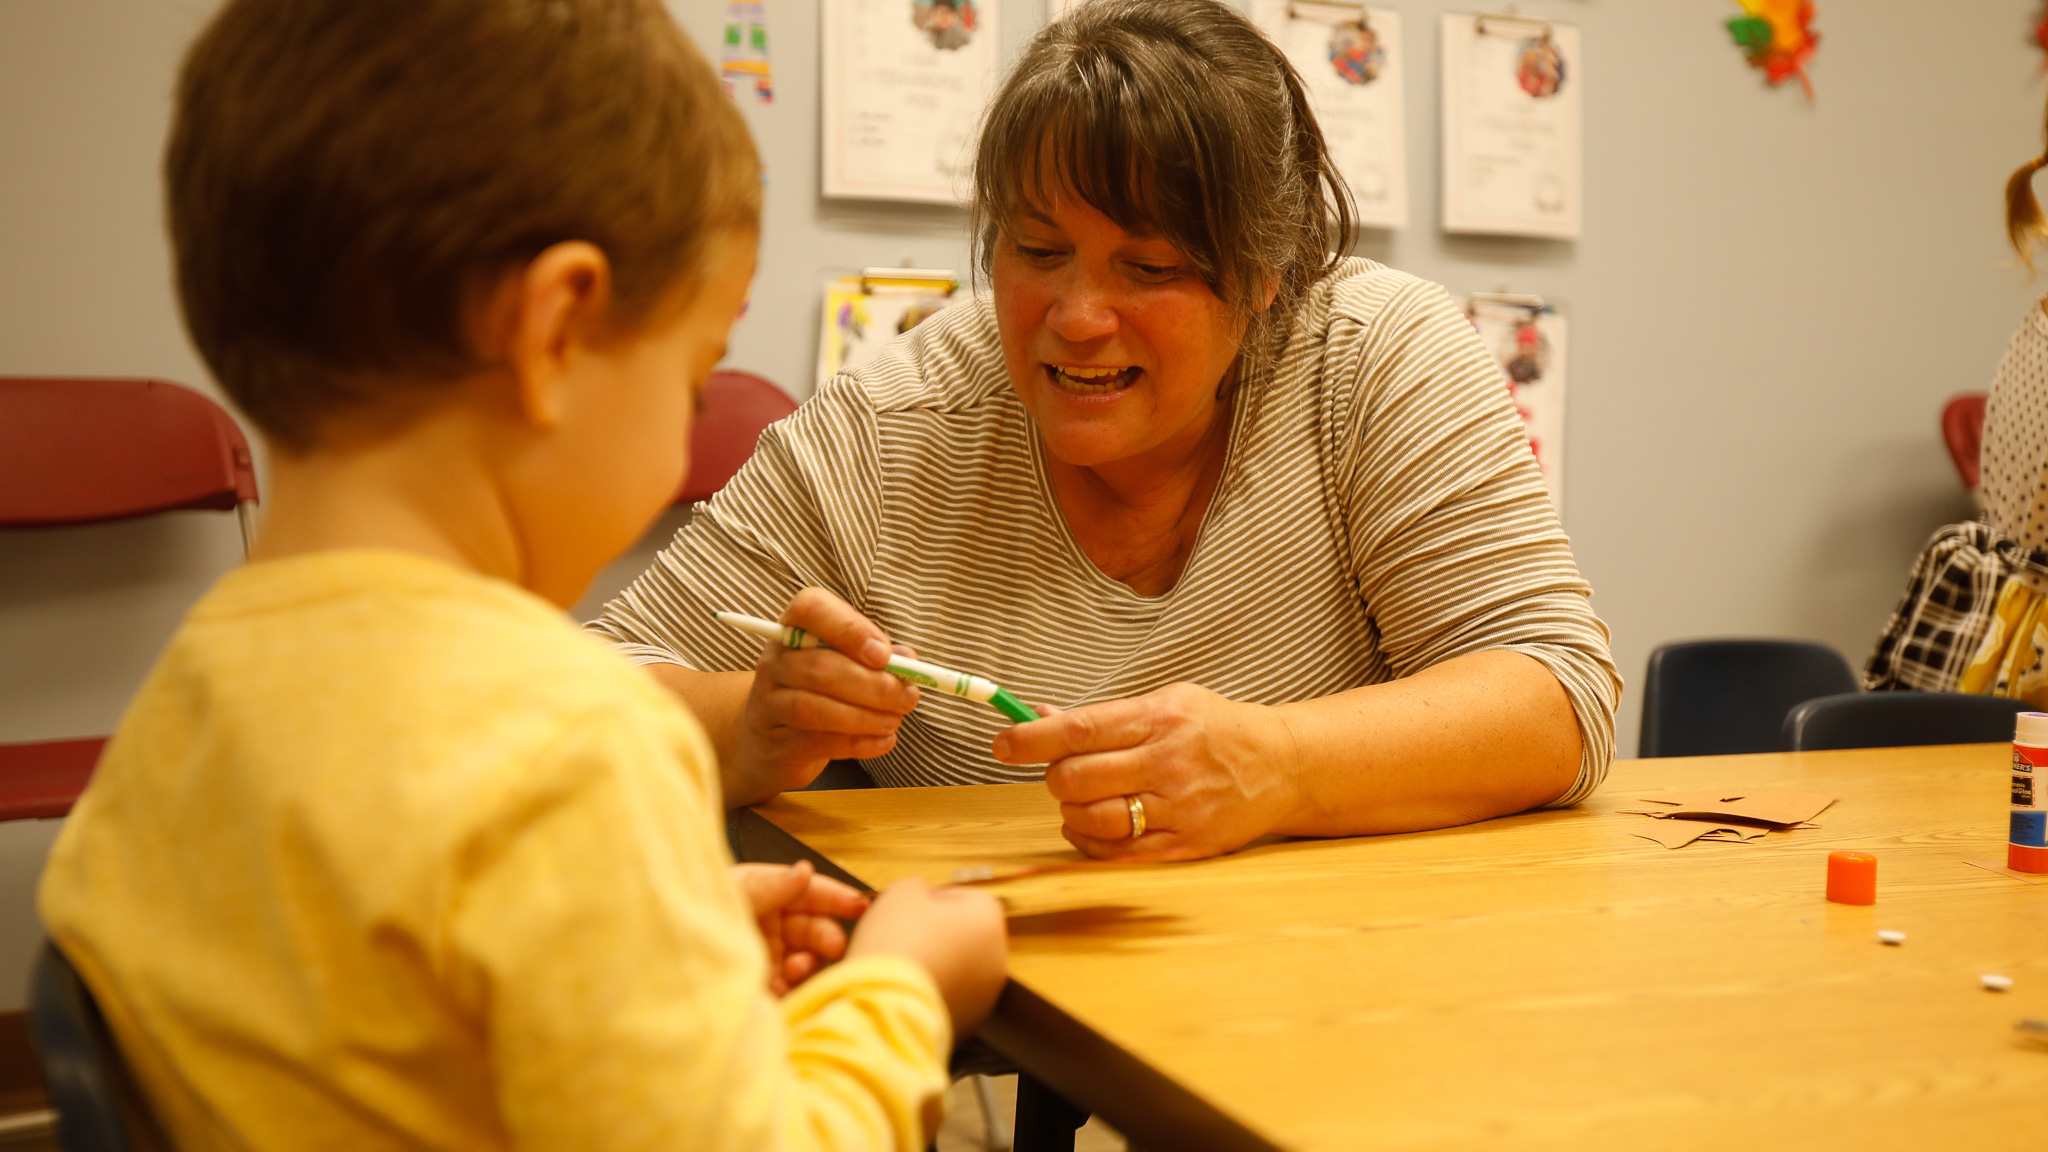 Preschool teacher works with her student on an art project